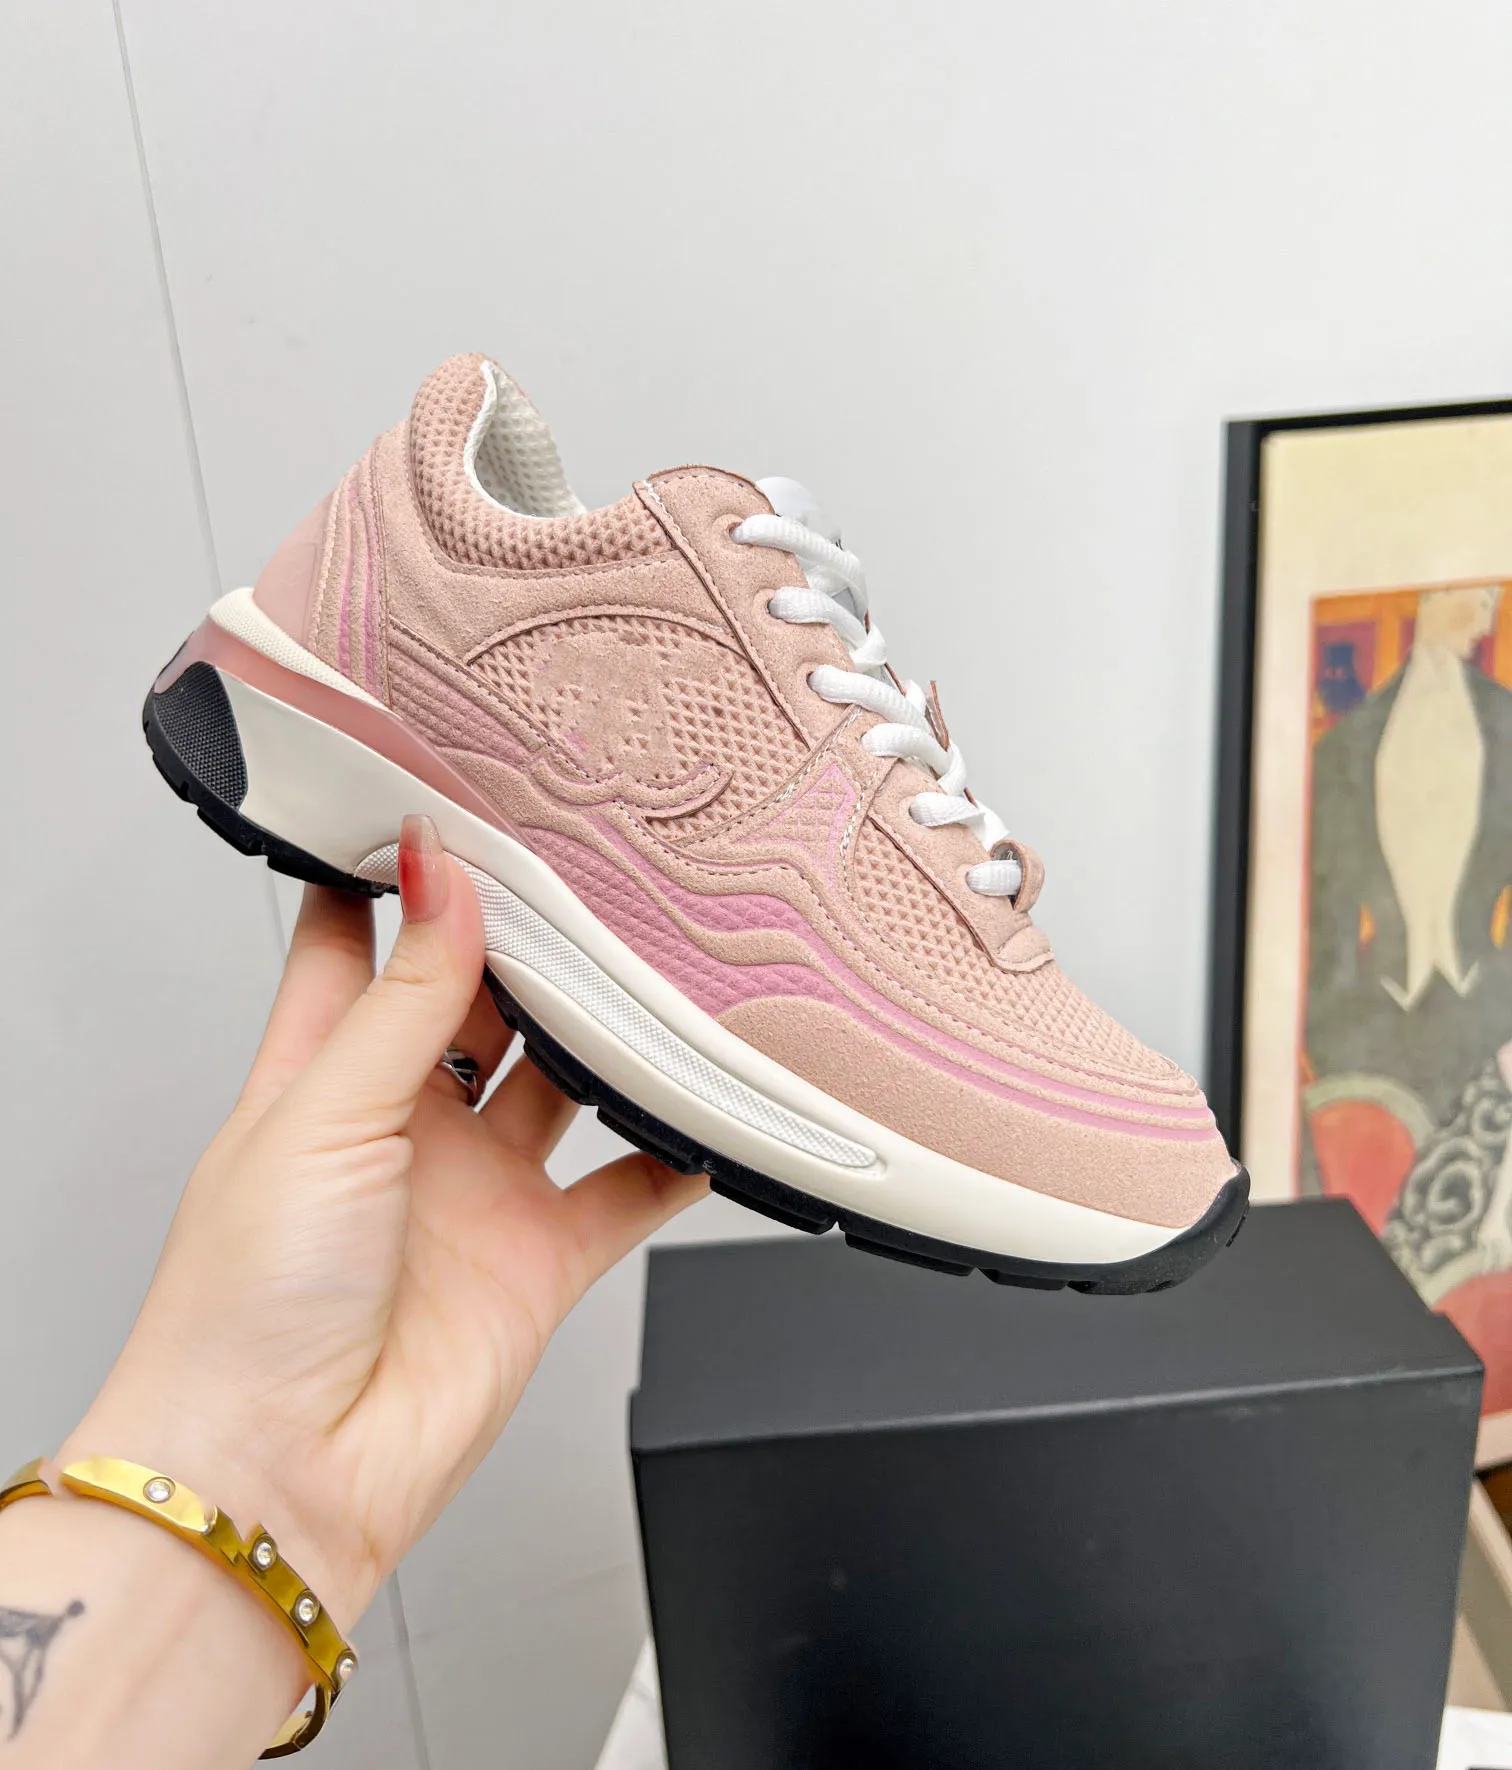 Diseñador de alta calidad Cotizas C Running Chanells Skate Skate Skate Woman CClies Trainers Mujeres Lace-Up Breathable Spring 87899